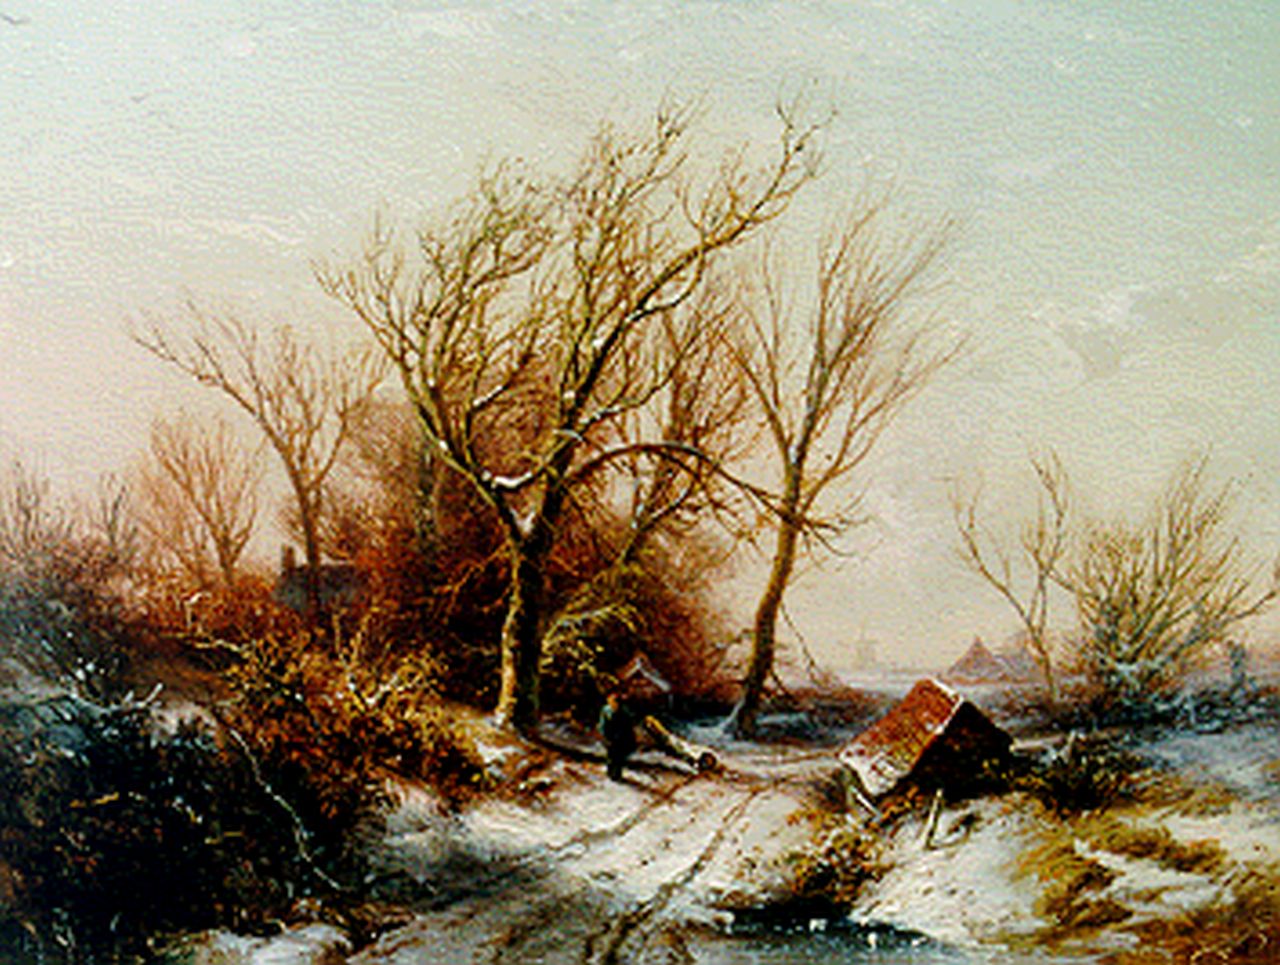 Kluyver P.L.F.  | 'Pieter' Lodewijk Francisco Kluyver, A winter landscape with a traveller on a path, oil on panel 23.3 x 30.8 cm, signed l.r.